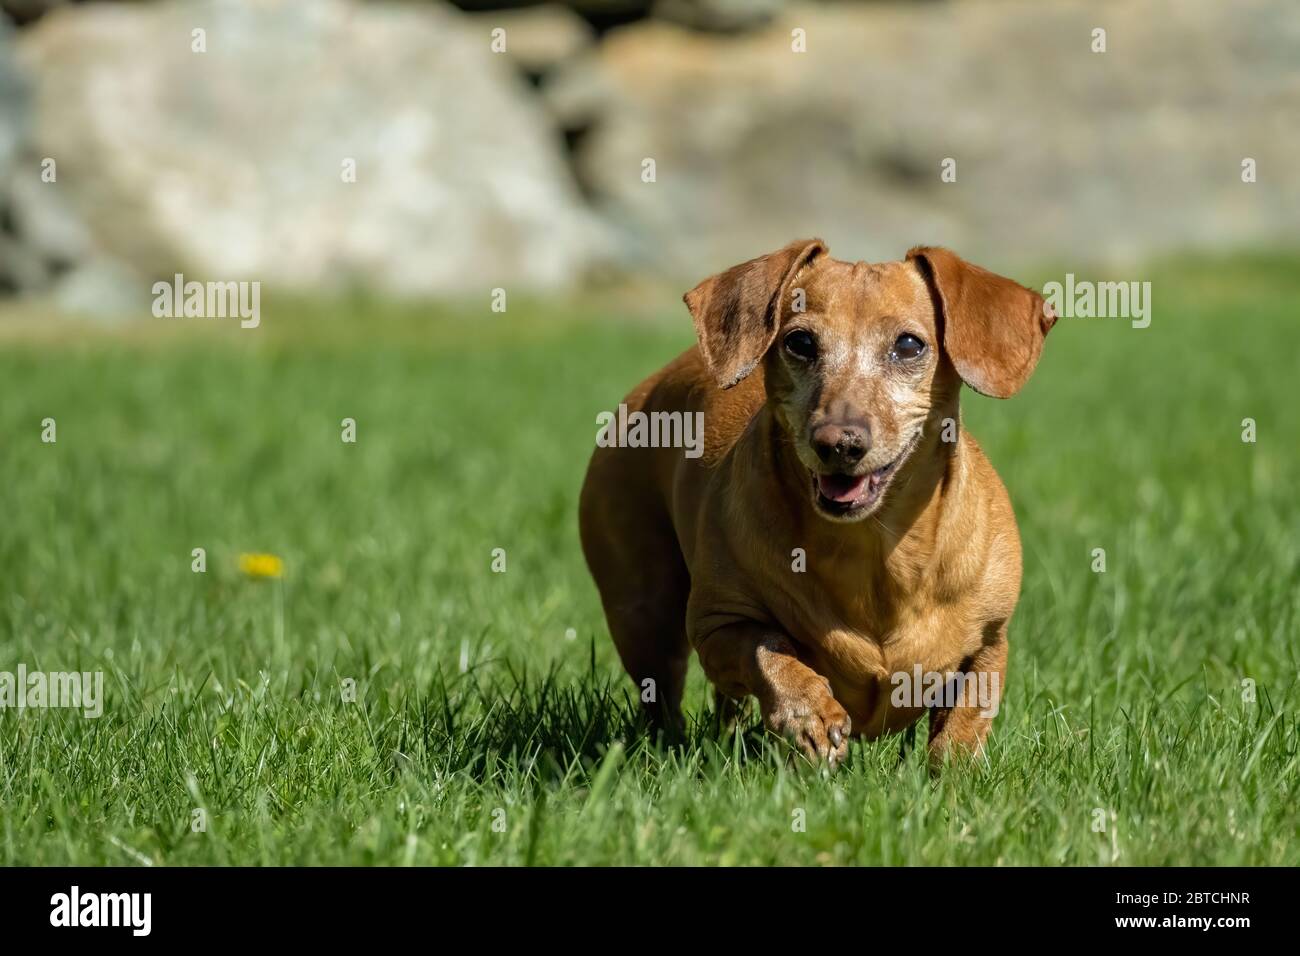 Photos of a small dog outside, running and stationary Stock Photo